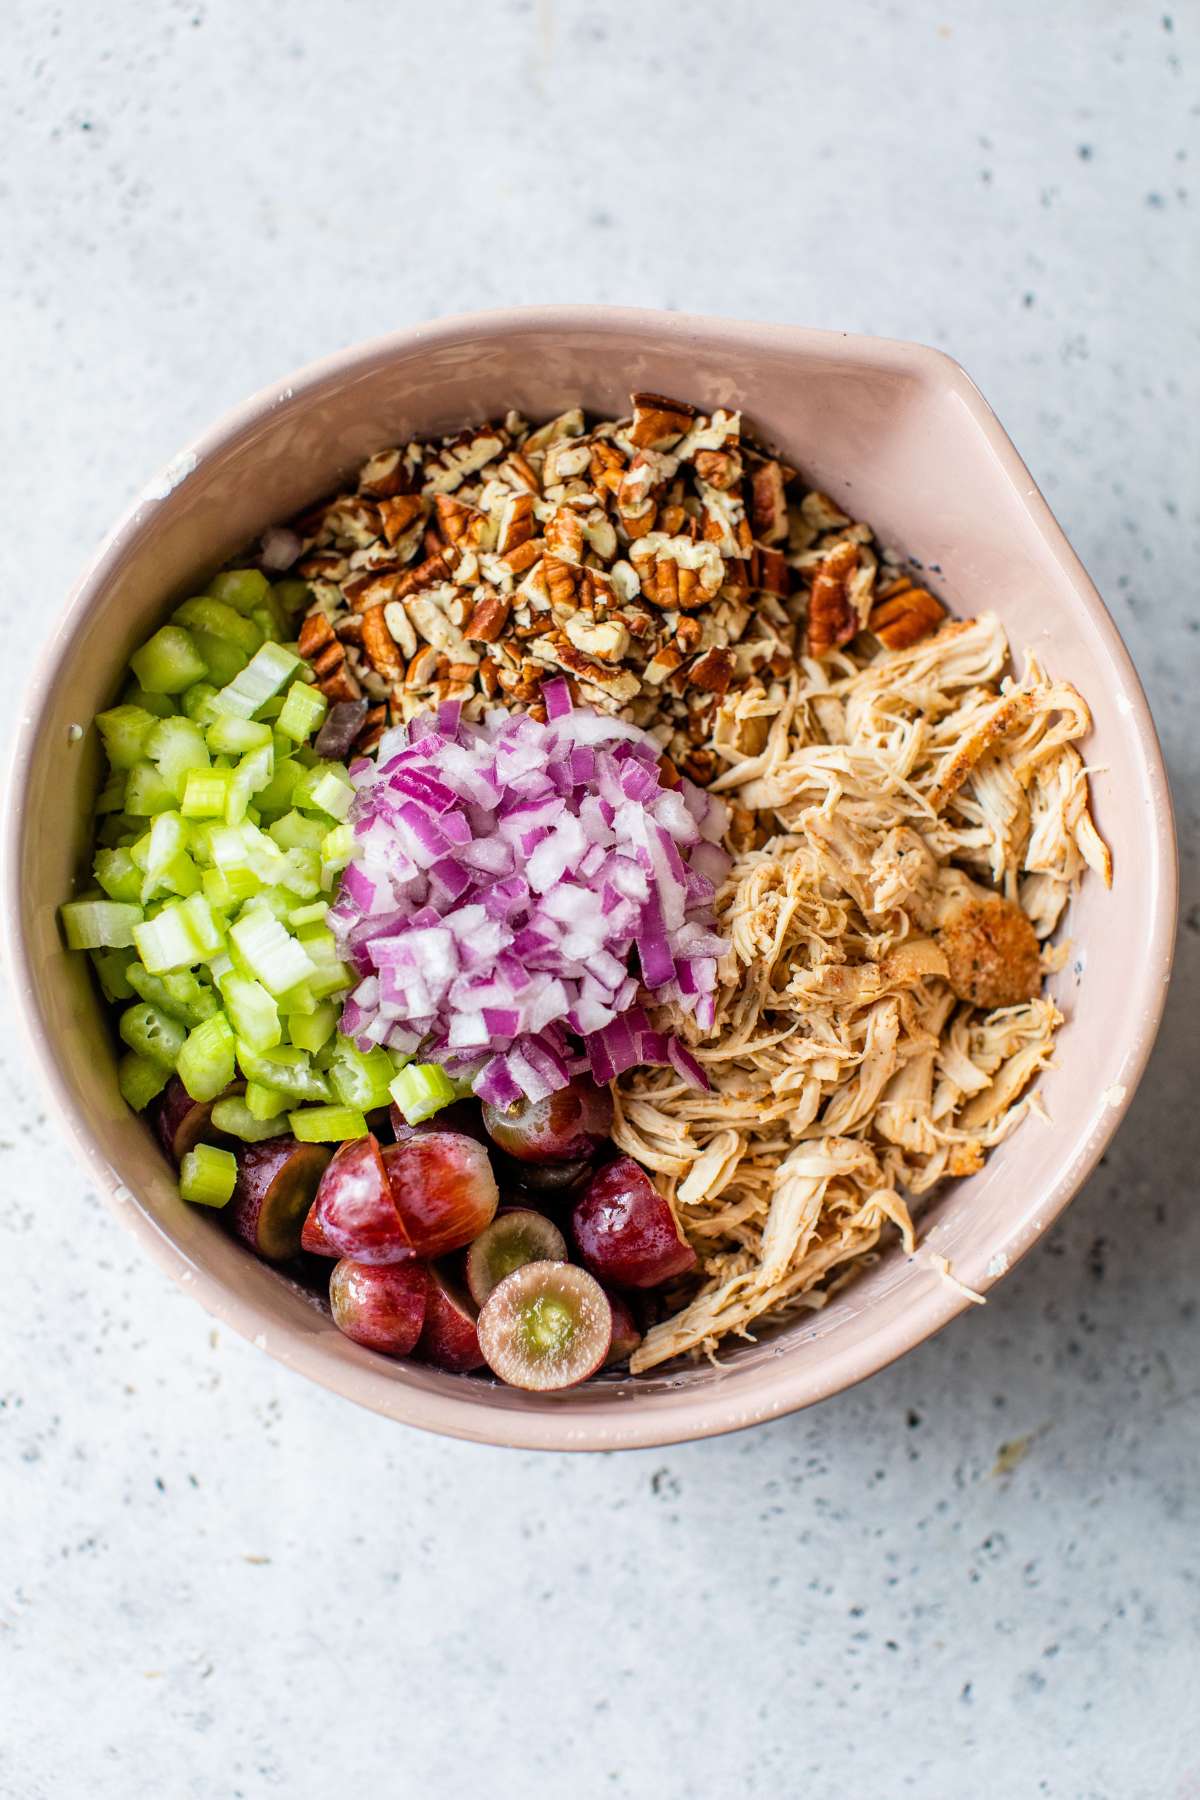 Pecans, chicken, red onion, grapes and celery in a large bowl.